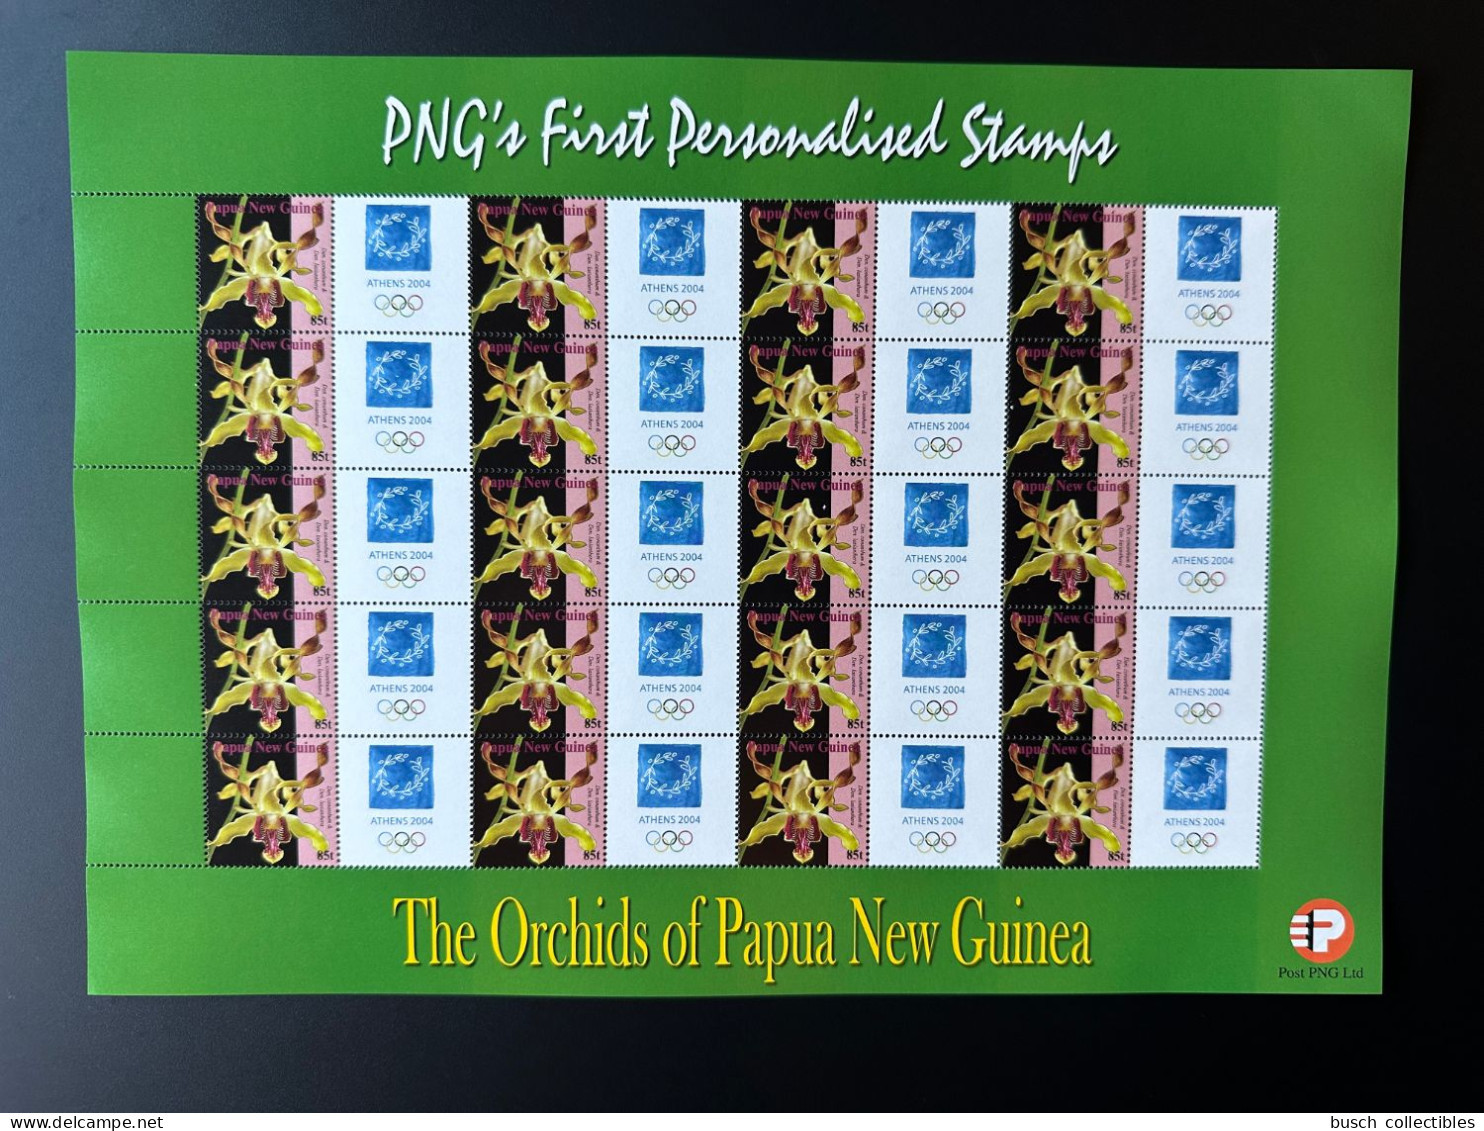 Papua New Guinea PNG 2007 Mi. 1244 Personalized Athens 2004 Olympic Games Jeux Olympiques Olympia Athen Orchids Flowers - Orchids